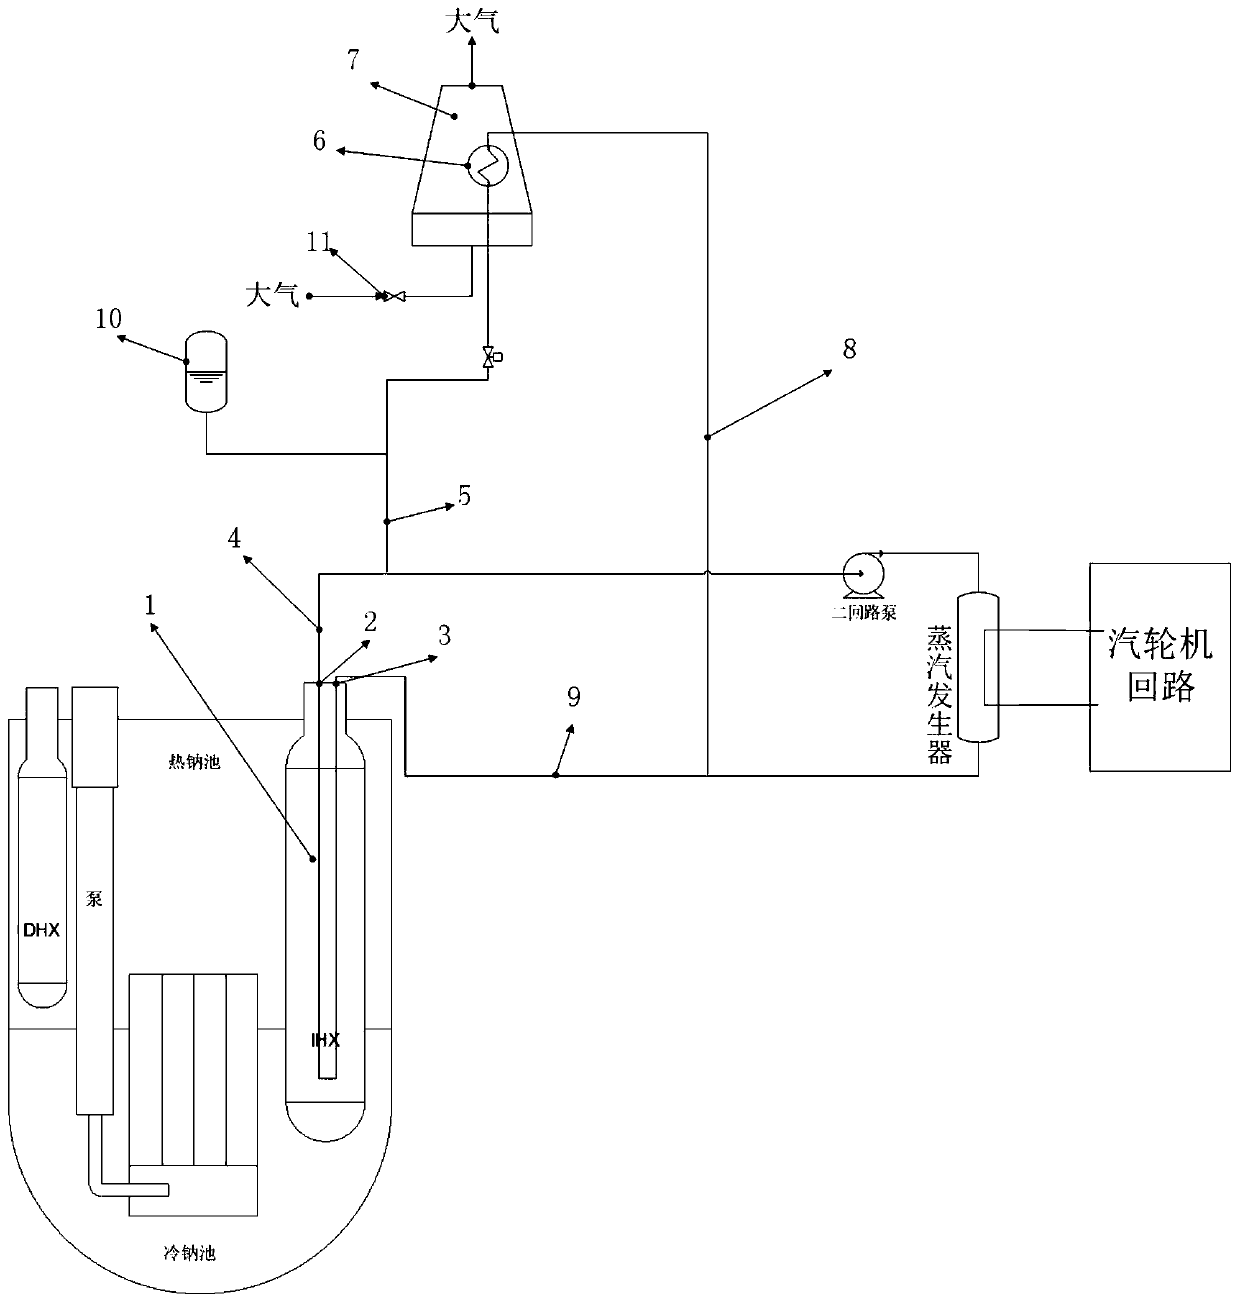 Sodium-cooled fast reactor intermediate-circuit passive-accident residual heat removal system